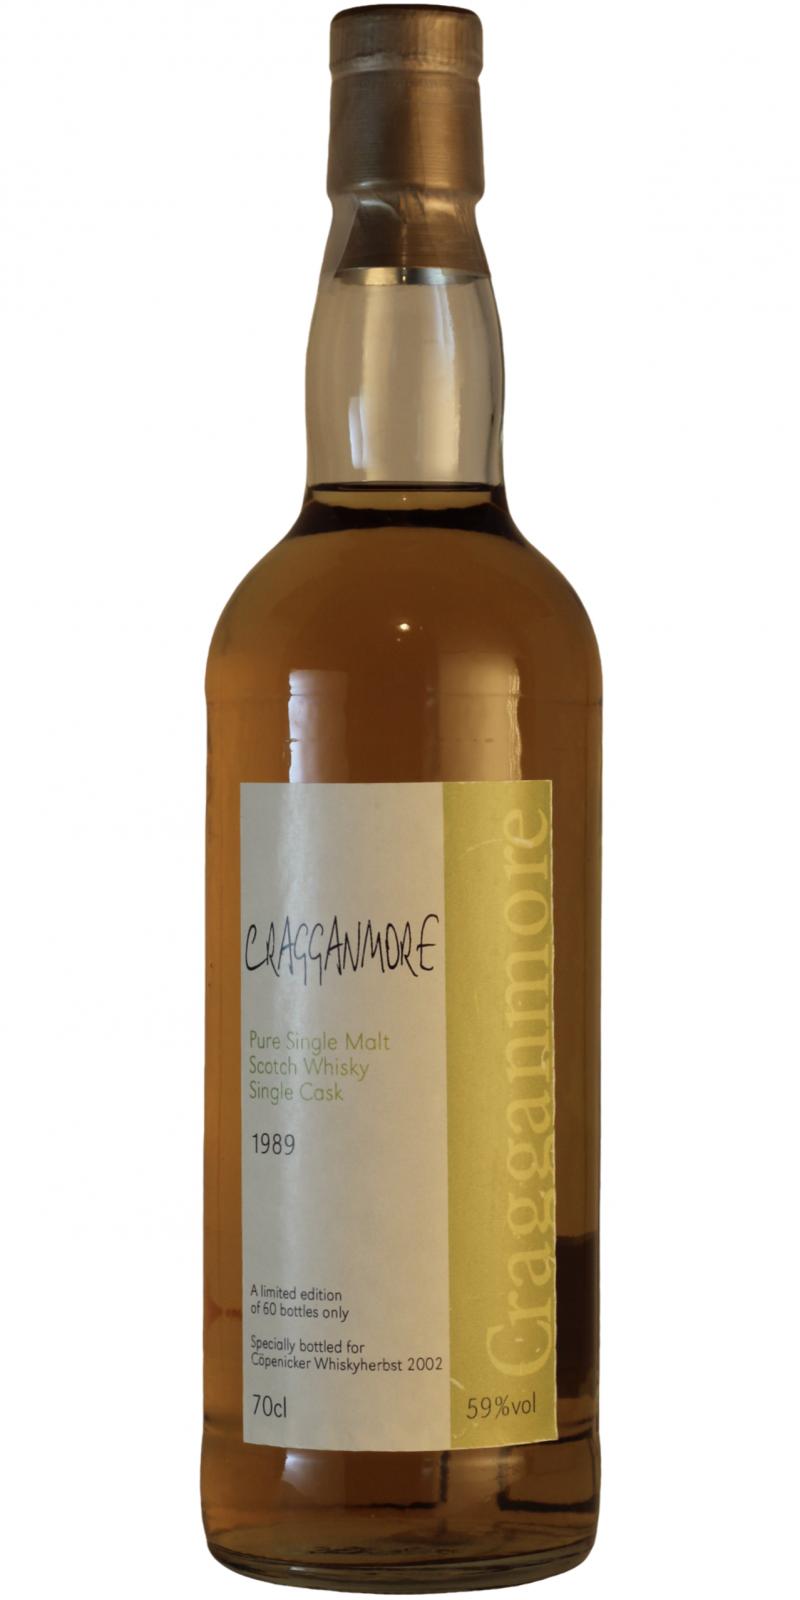 Cragganmore 1989 KzB Copenicker Whisky Herbst Bourbon 59% 700ml